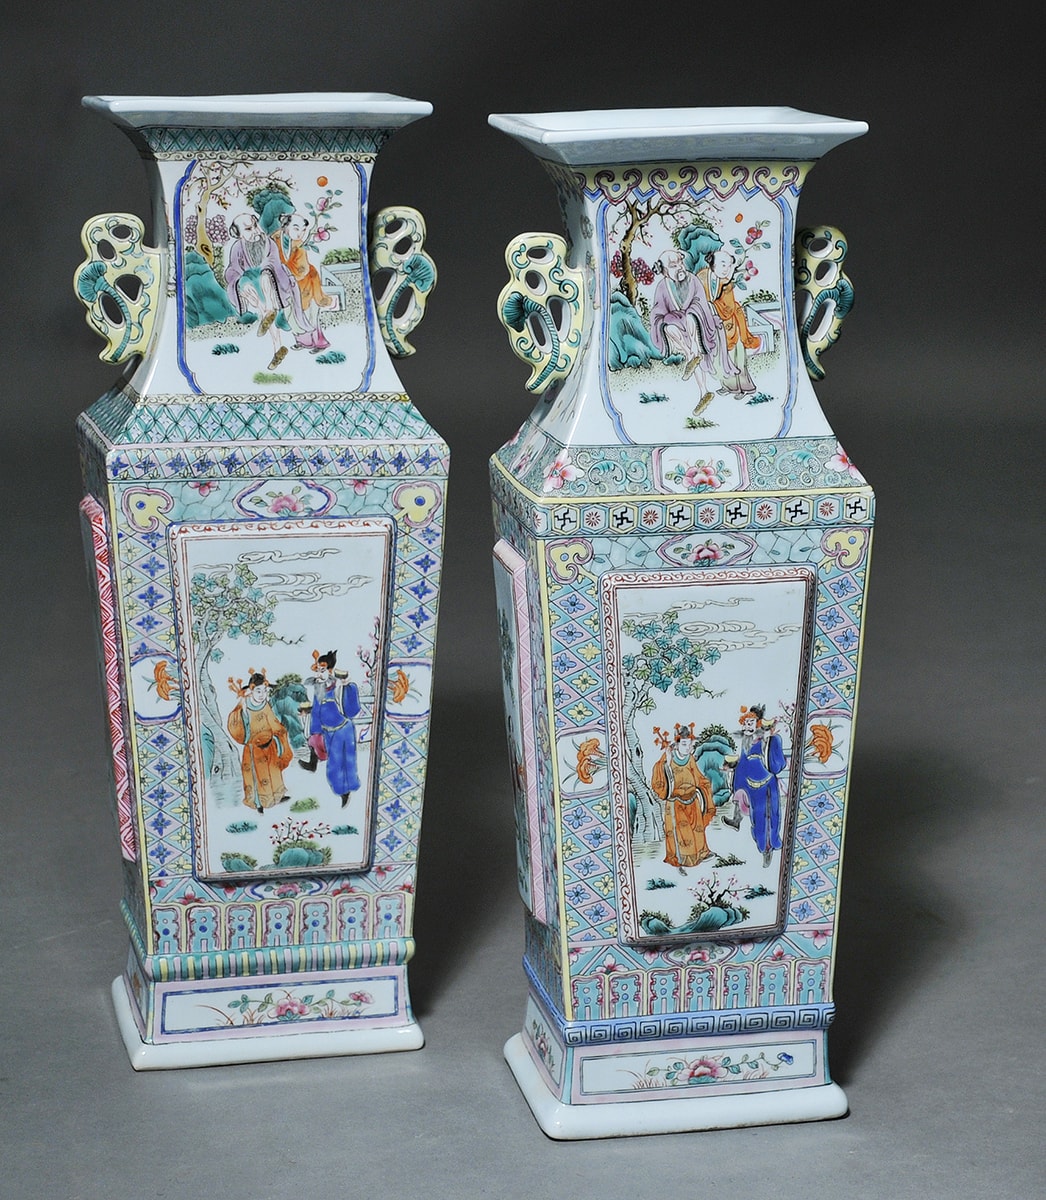 Chinese famille rose vases